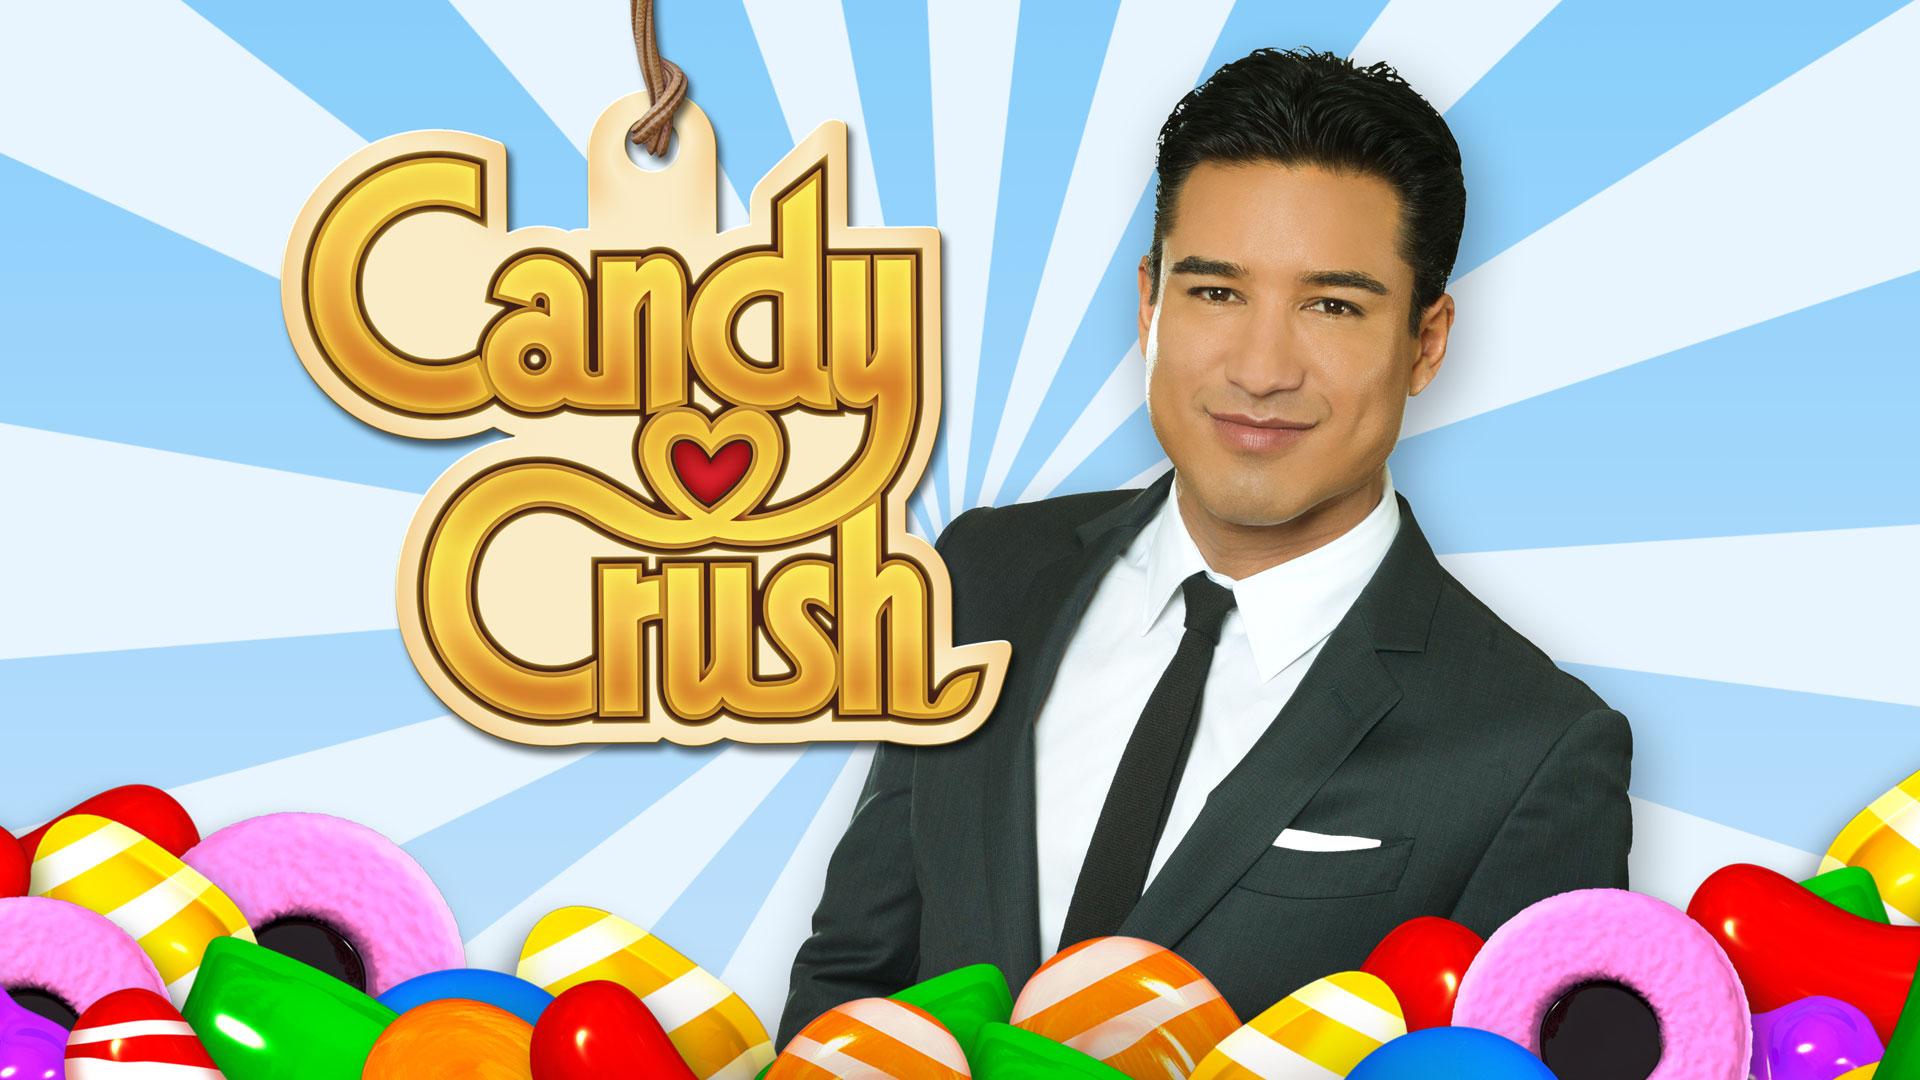 Candy Crush' Game Show Lands Series Order at CBS